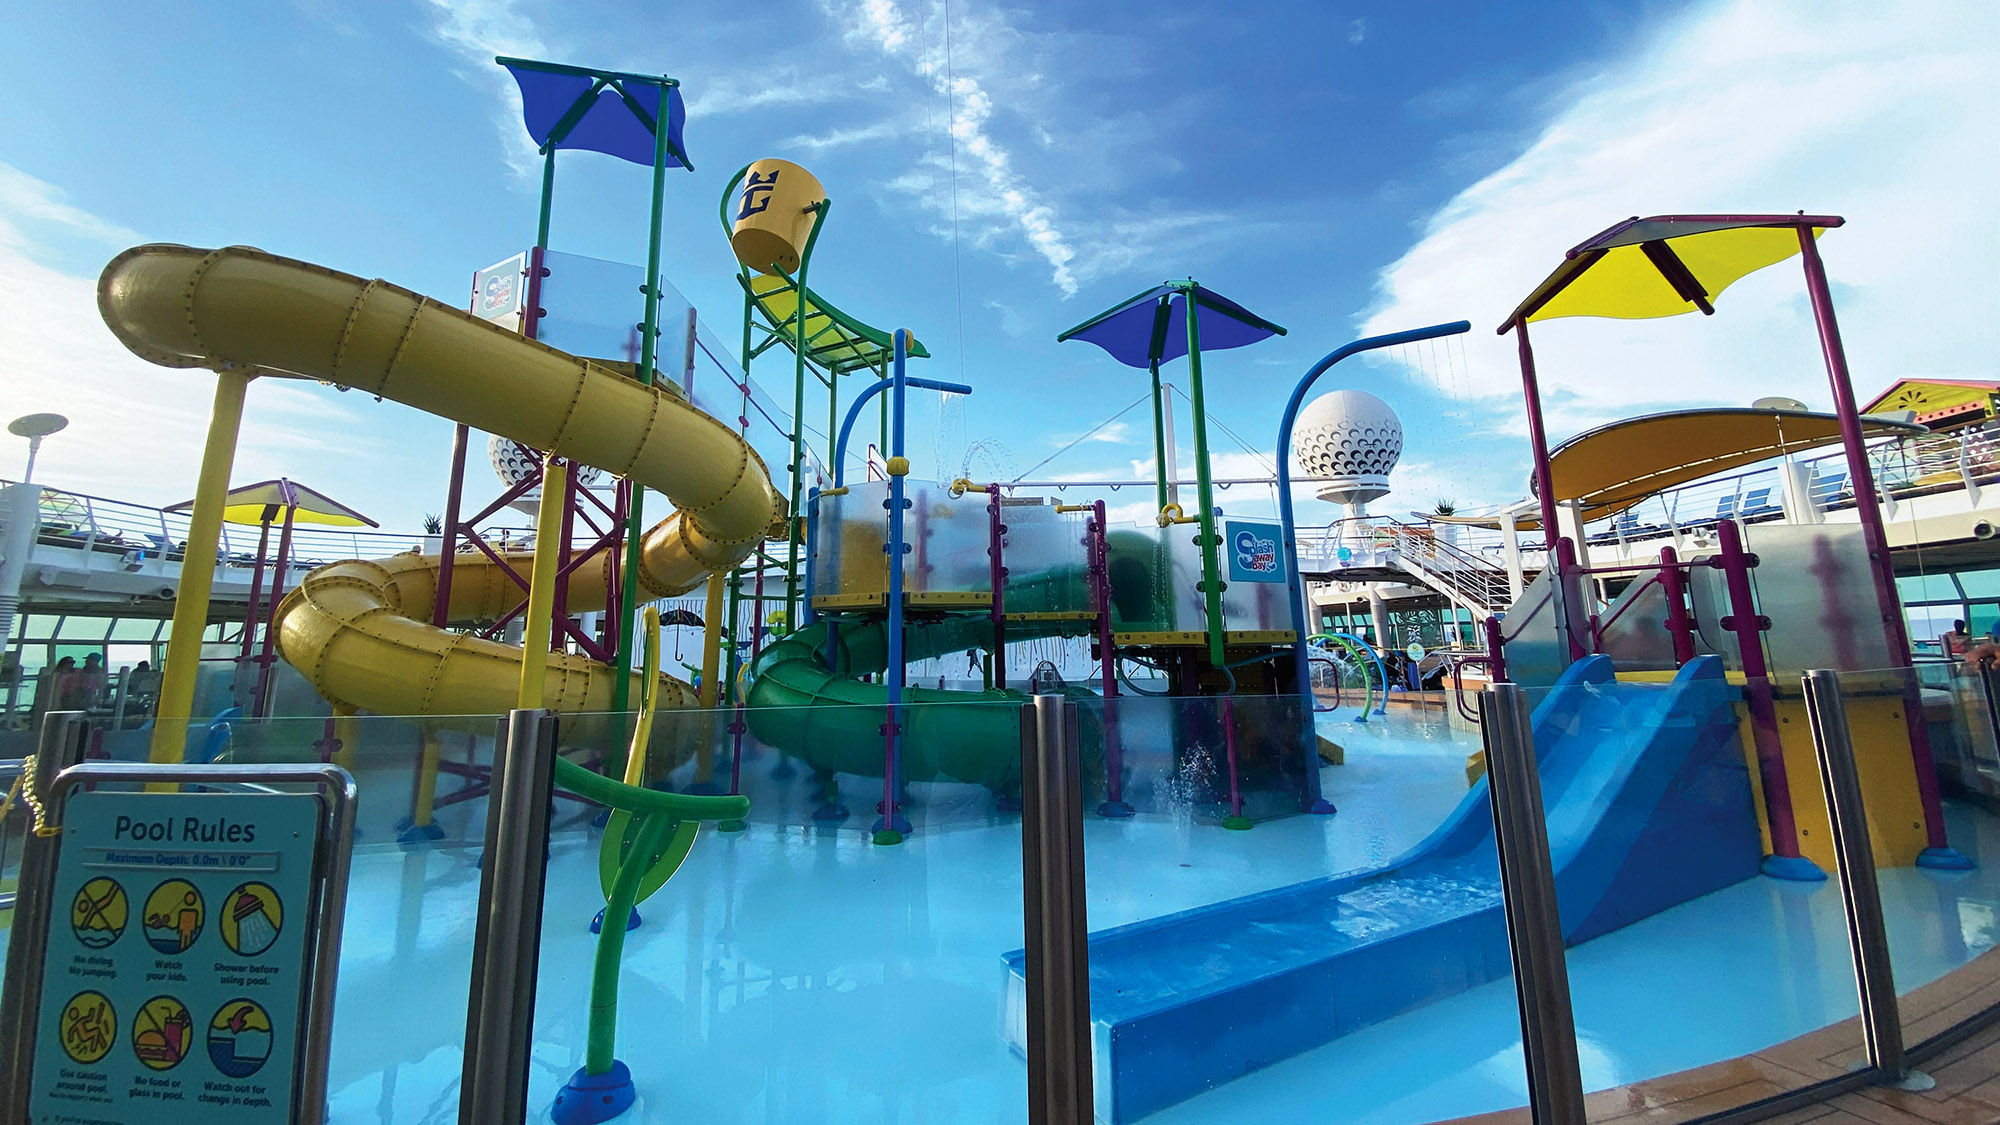 The ship's Splashaway Bay is Royal Caribbean's take on a resort-style waterpark and was added during a refurbishment that debuted in March 2020.